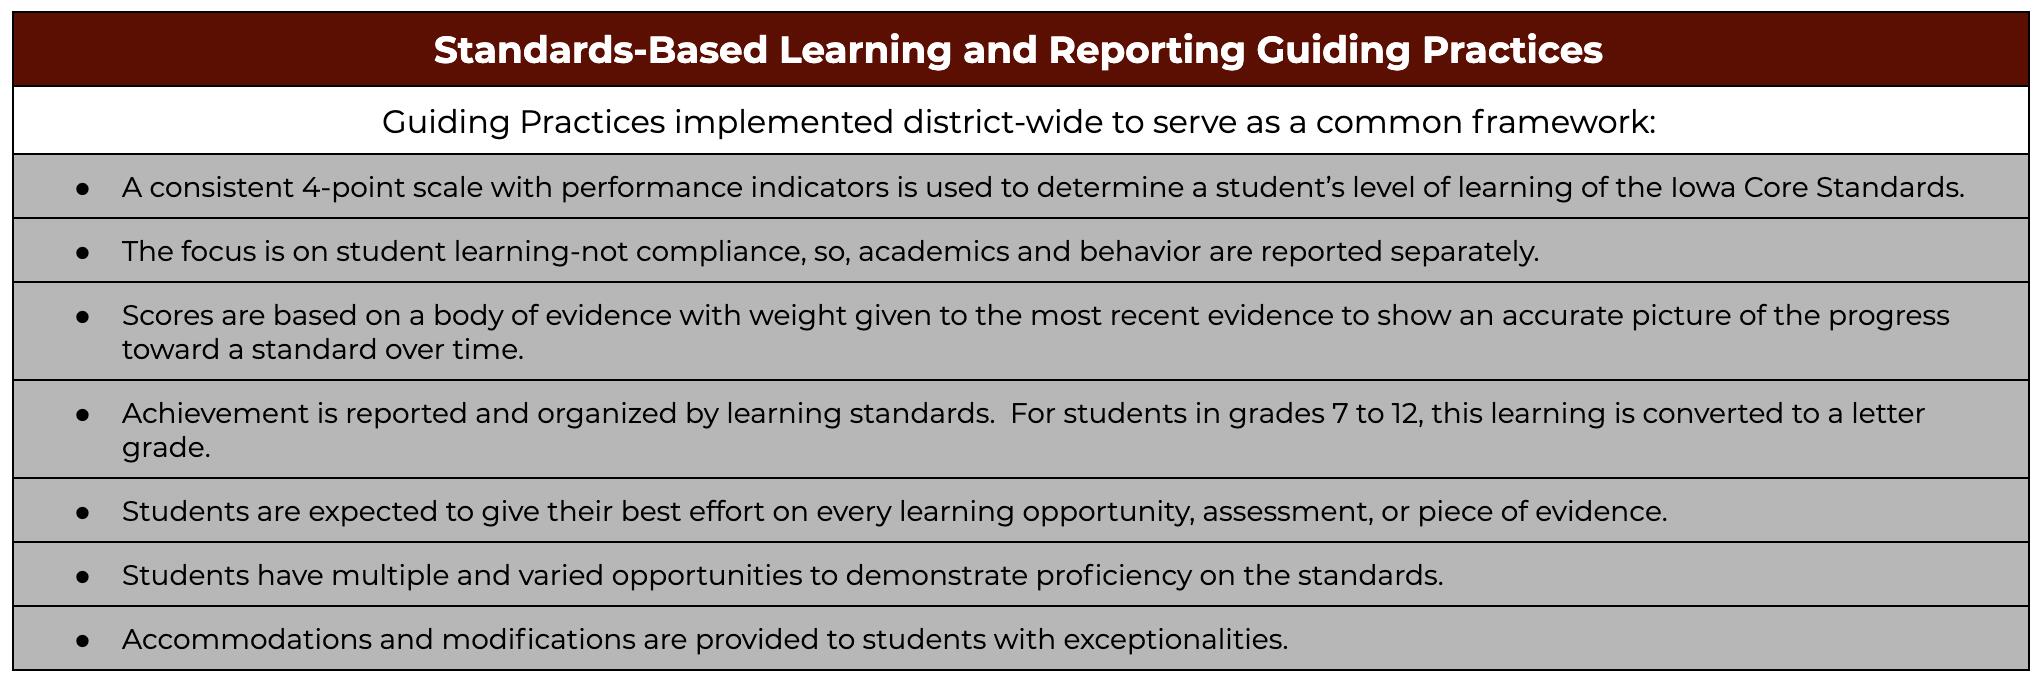 standards- based learning and reporting guiding practices